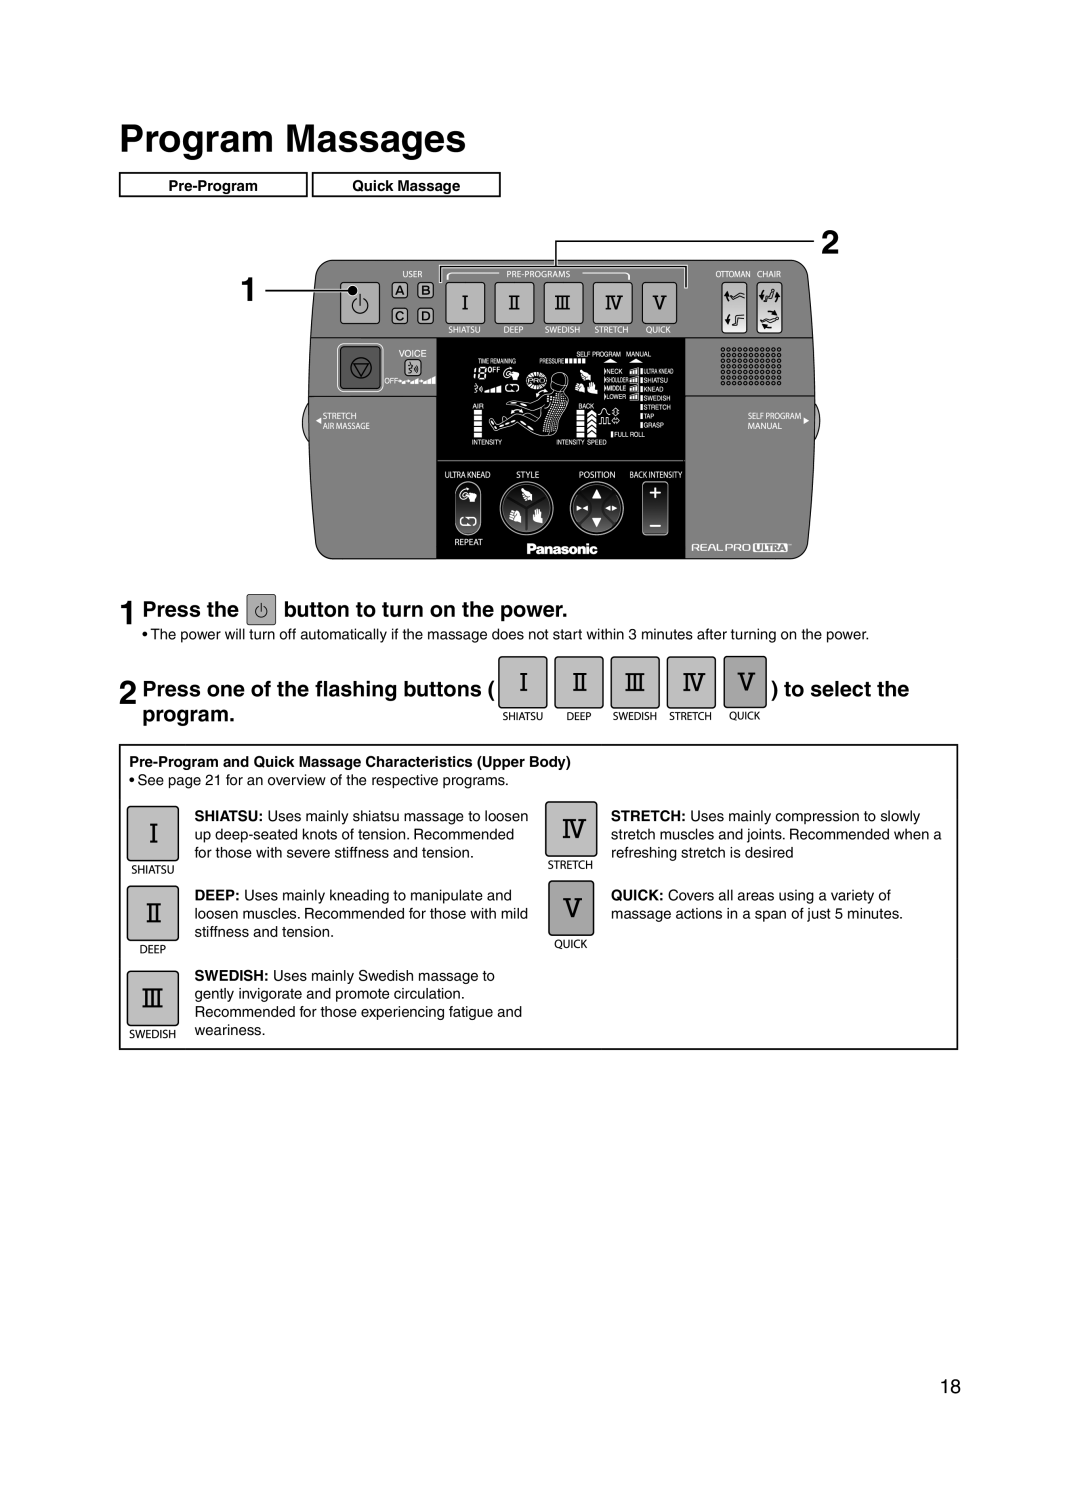 Panasonic EP30004 Program Massages, Press the button to turn on the power, Press one of the flashing buttons, program 